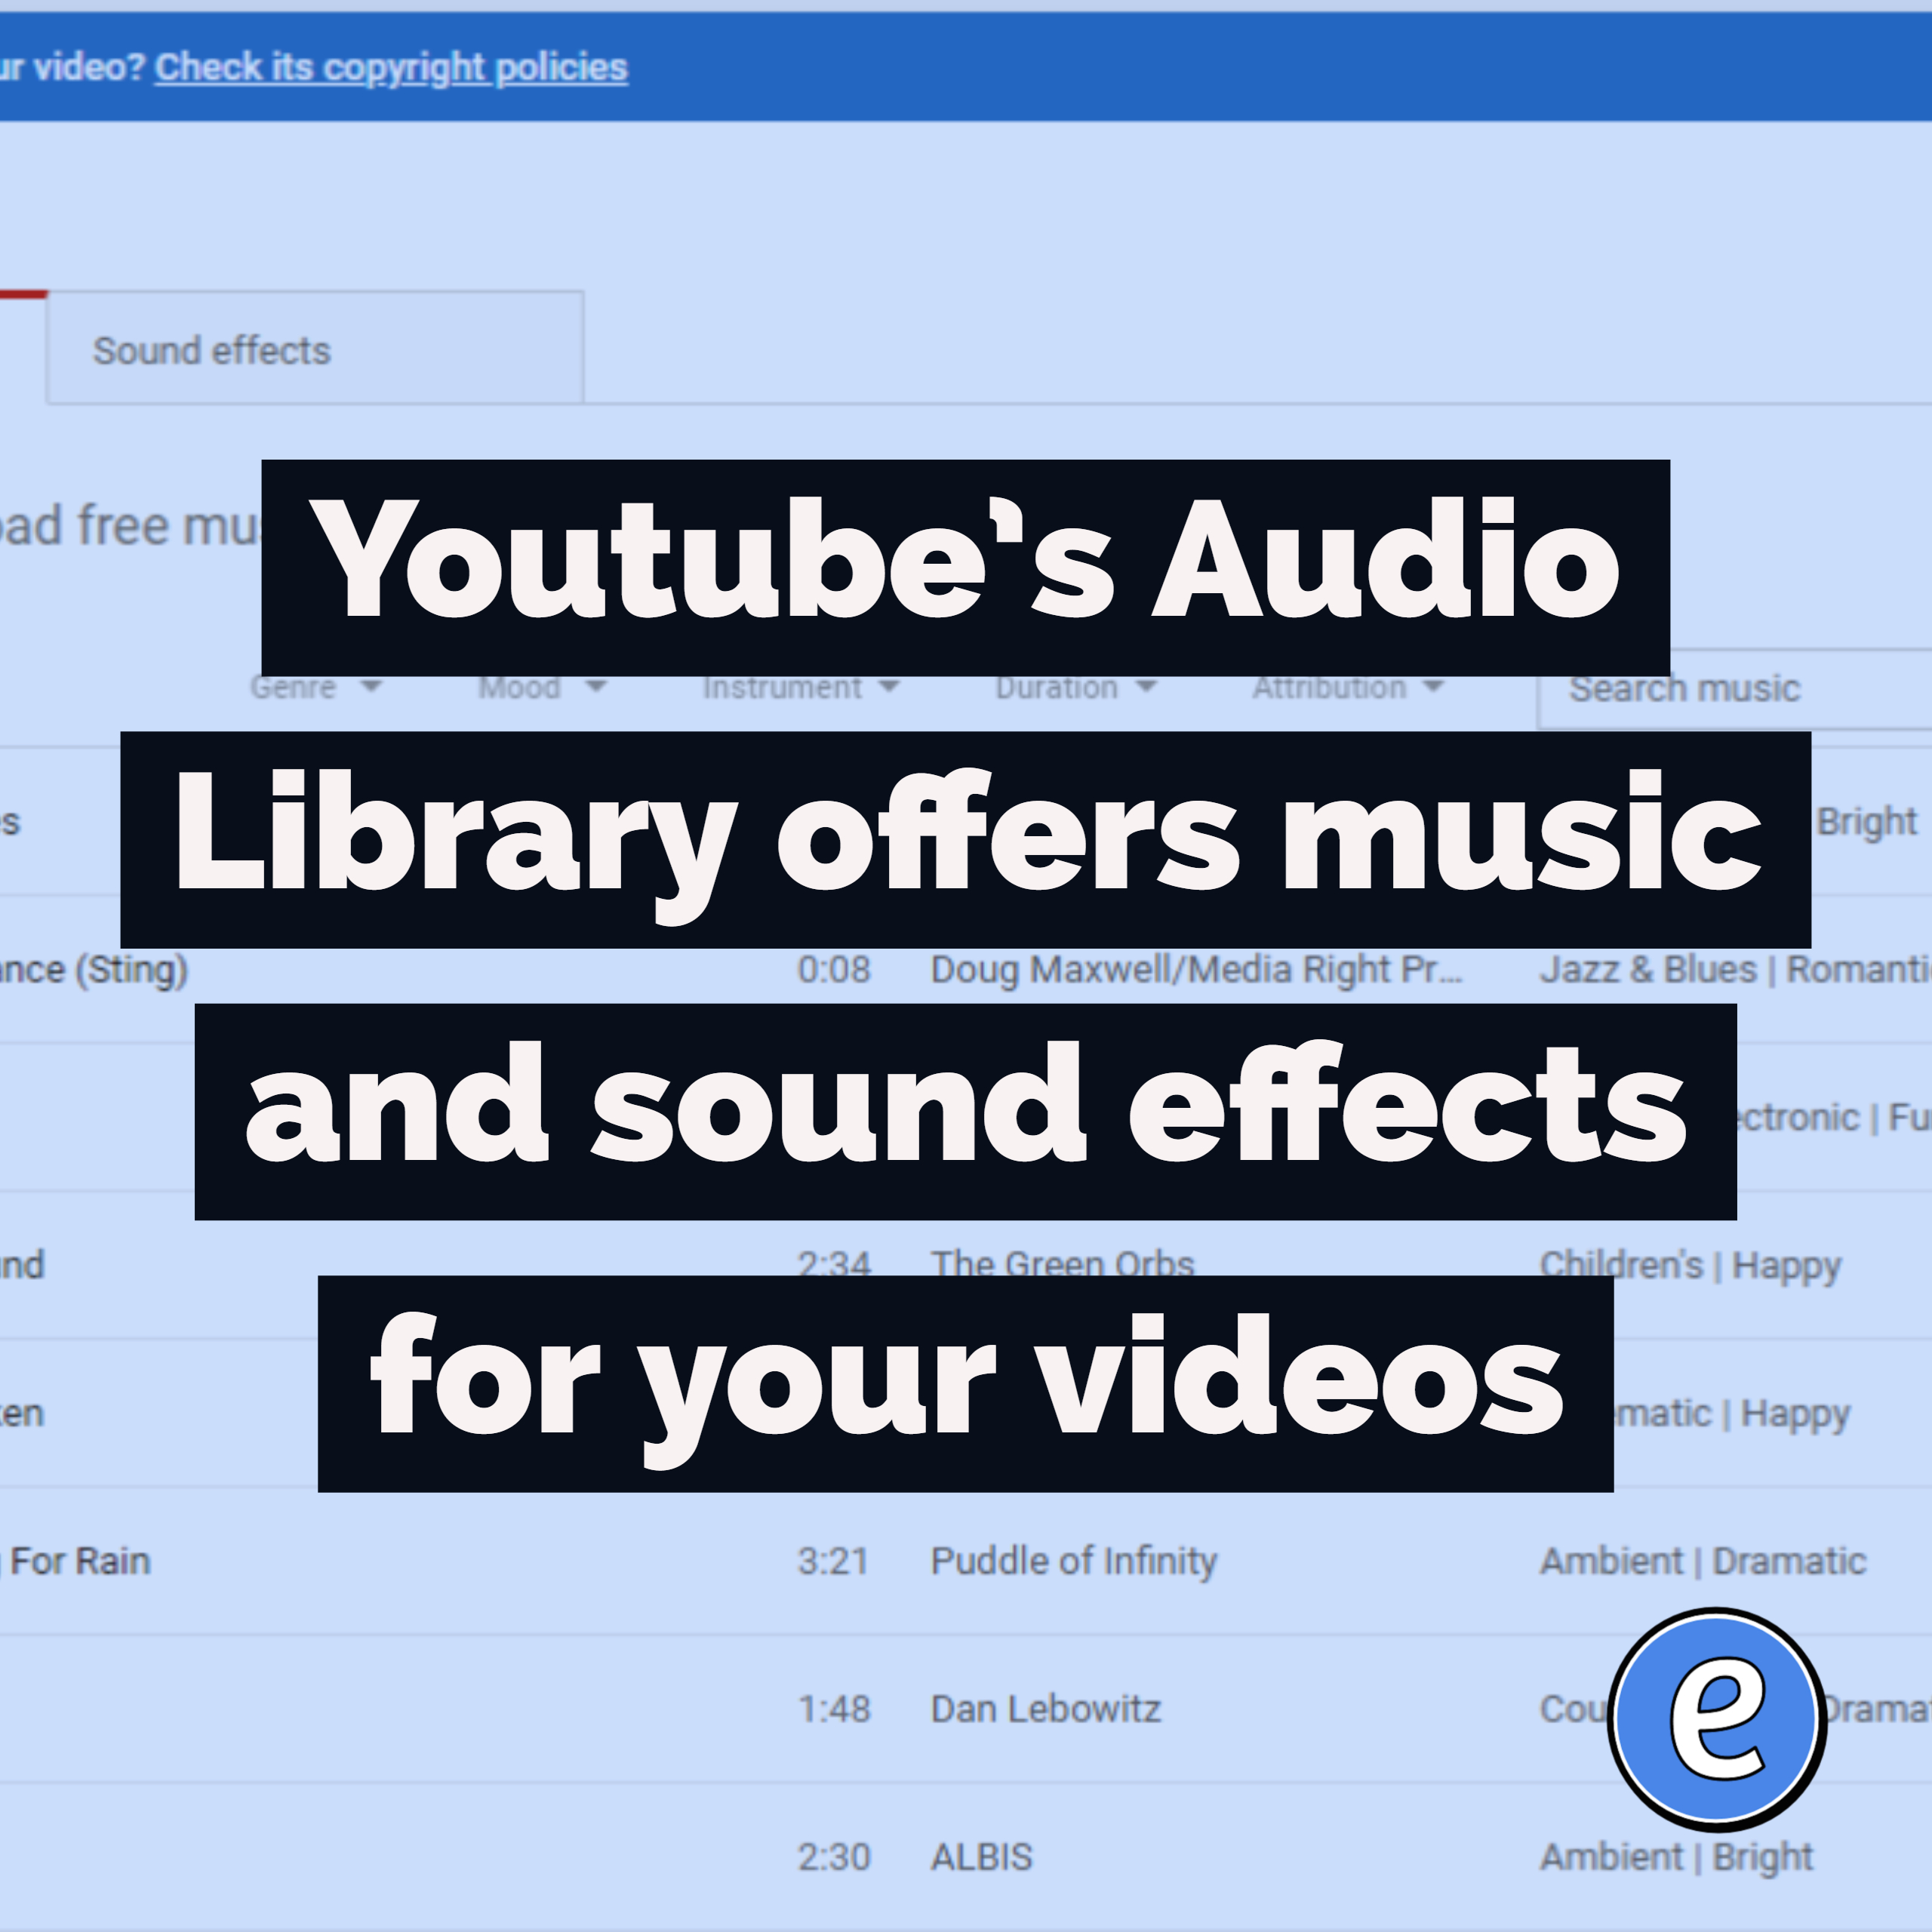 Youtube’s Audio Library offers music and sound effects for your videos